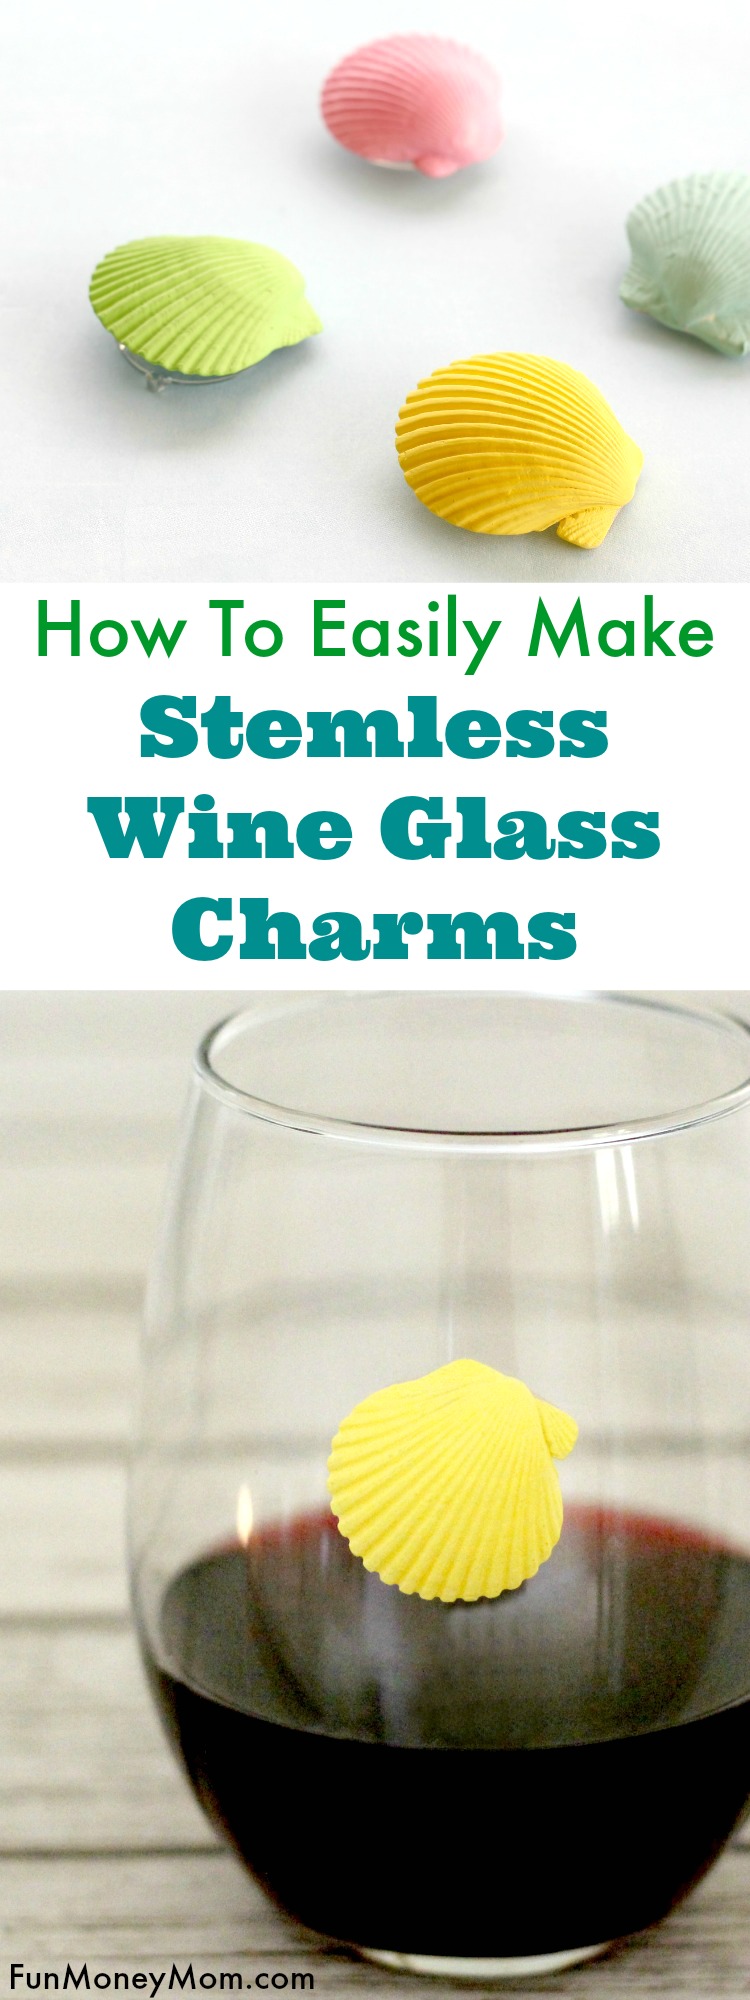 Want an easy craft that'll also help you figure out which wine glass is yours? These cute stemless wine glass charms are both fun and easy to make.